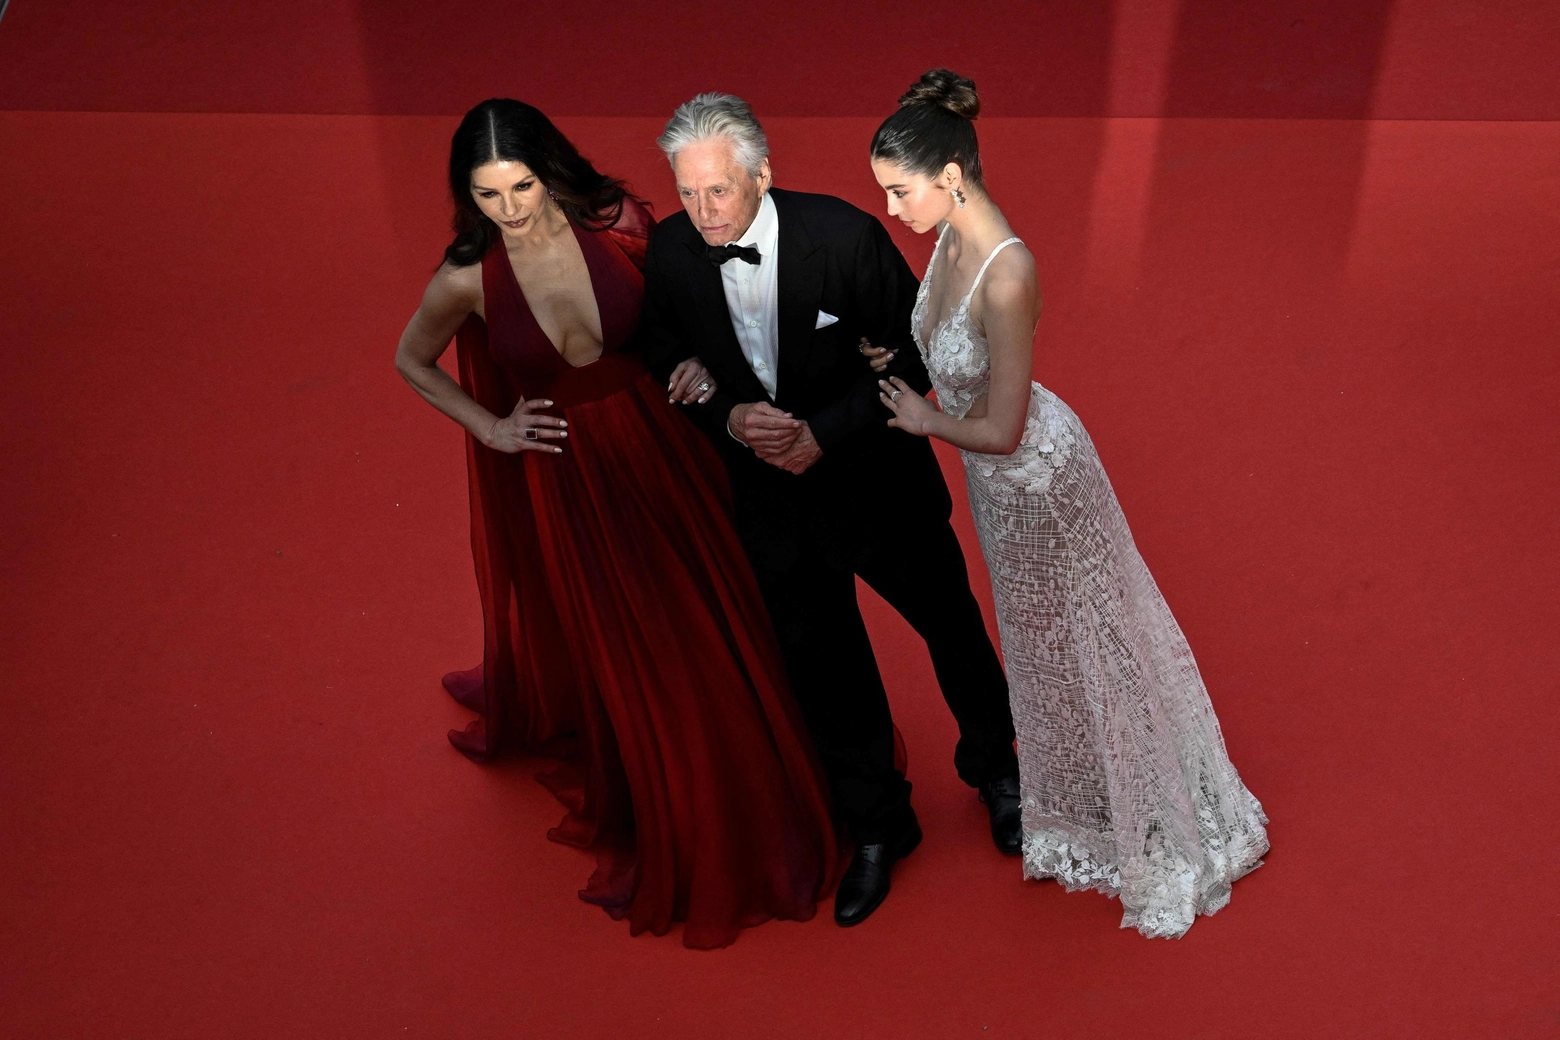 US actor and Honorary Palme d’or of the 76th Festival de Cannes Michael Douglas (C) arrives with his wife British actress Catherine Zeta-Jones (L) and daughter Carys for the opening ceremony and the screening of the film "Jeanne du Barry" during the 76th edition of the Cannes Film Festival in Cannes, southern France, on May 16, 2023. (Photo by Patricia Moreira / AFP)